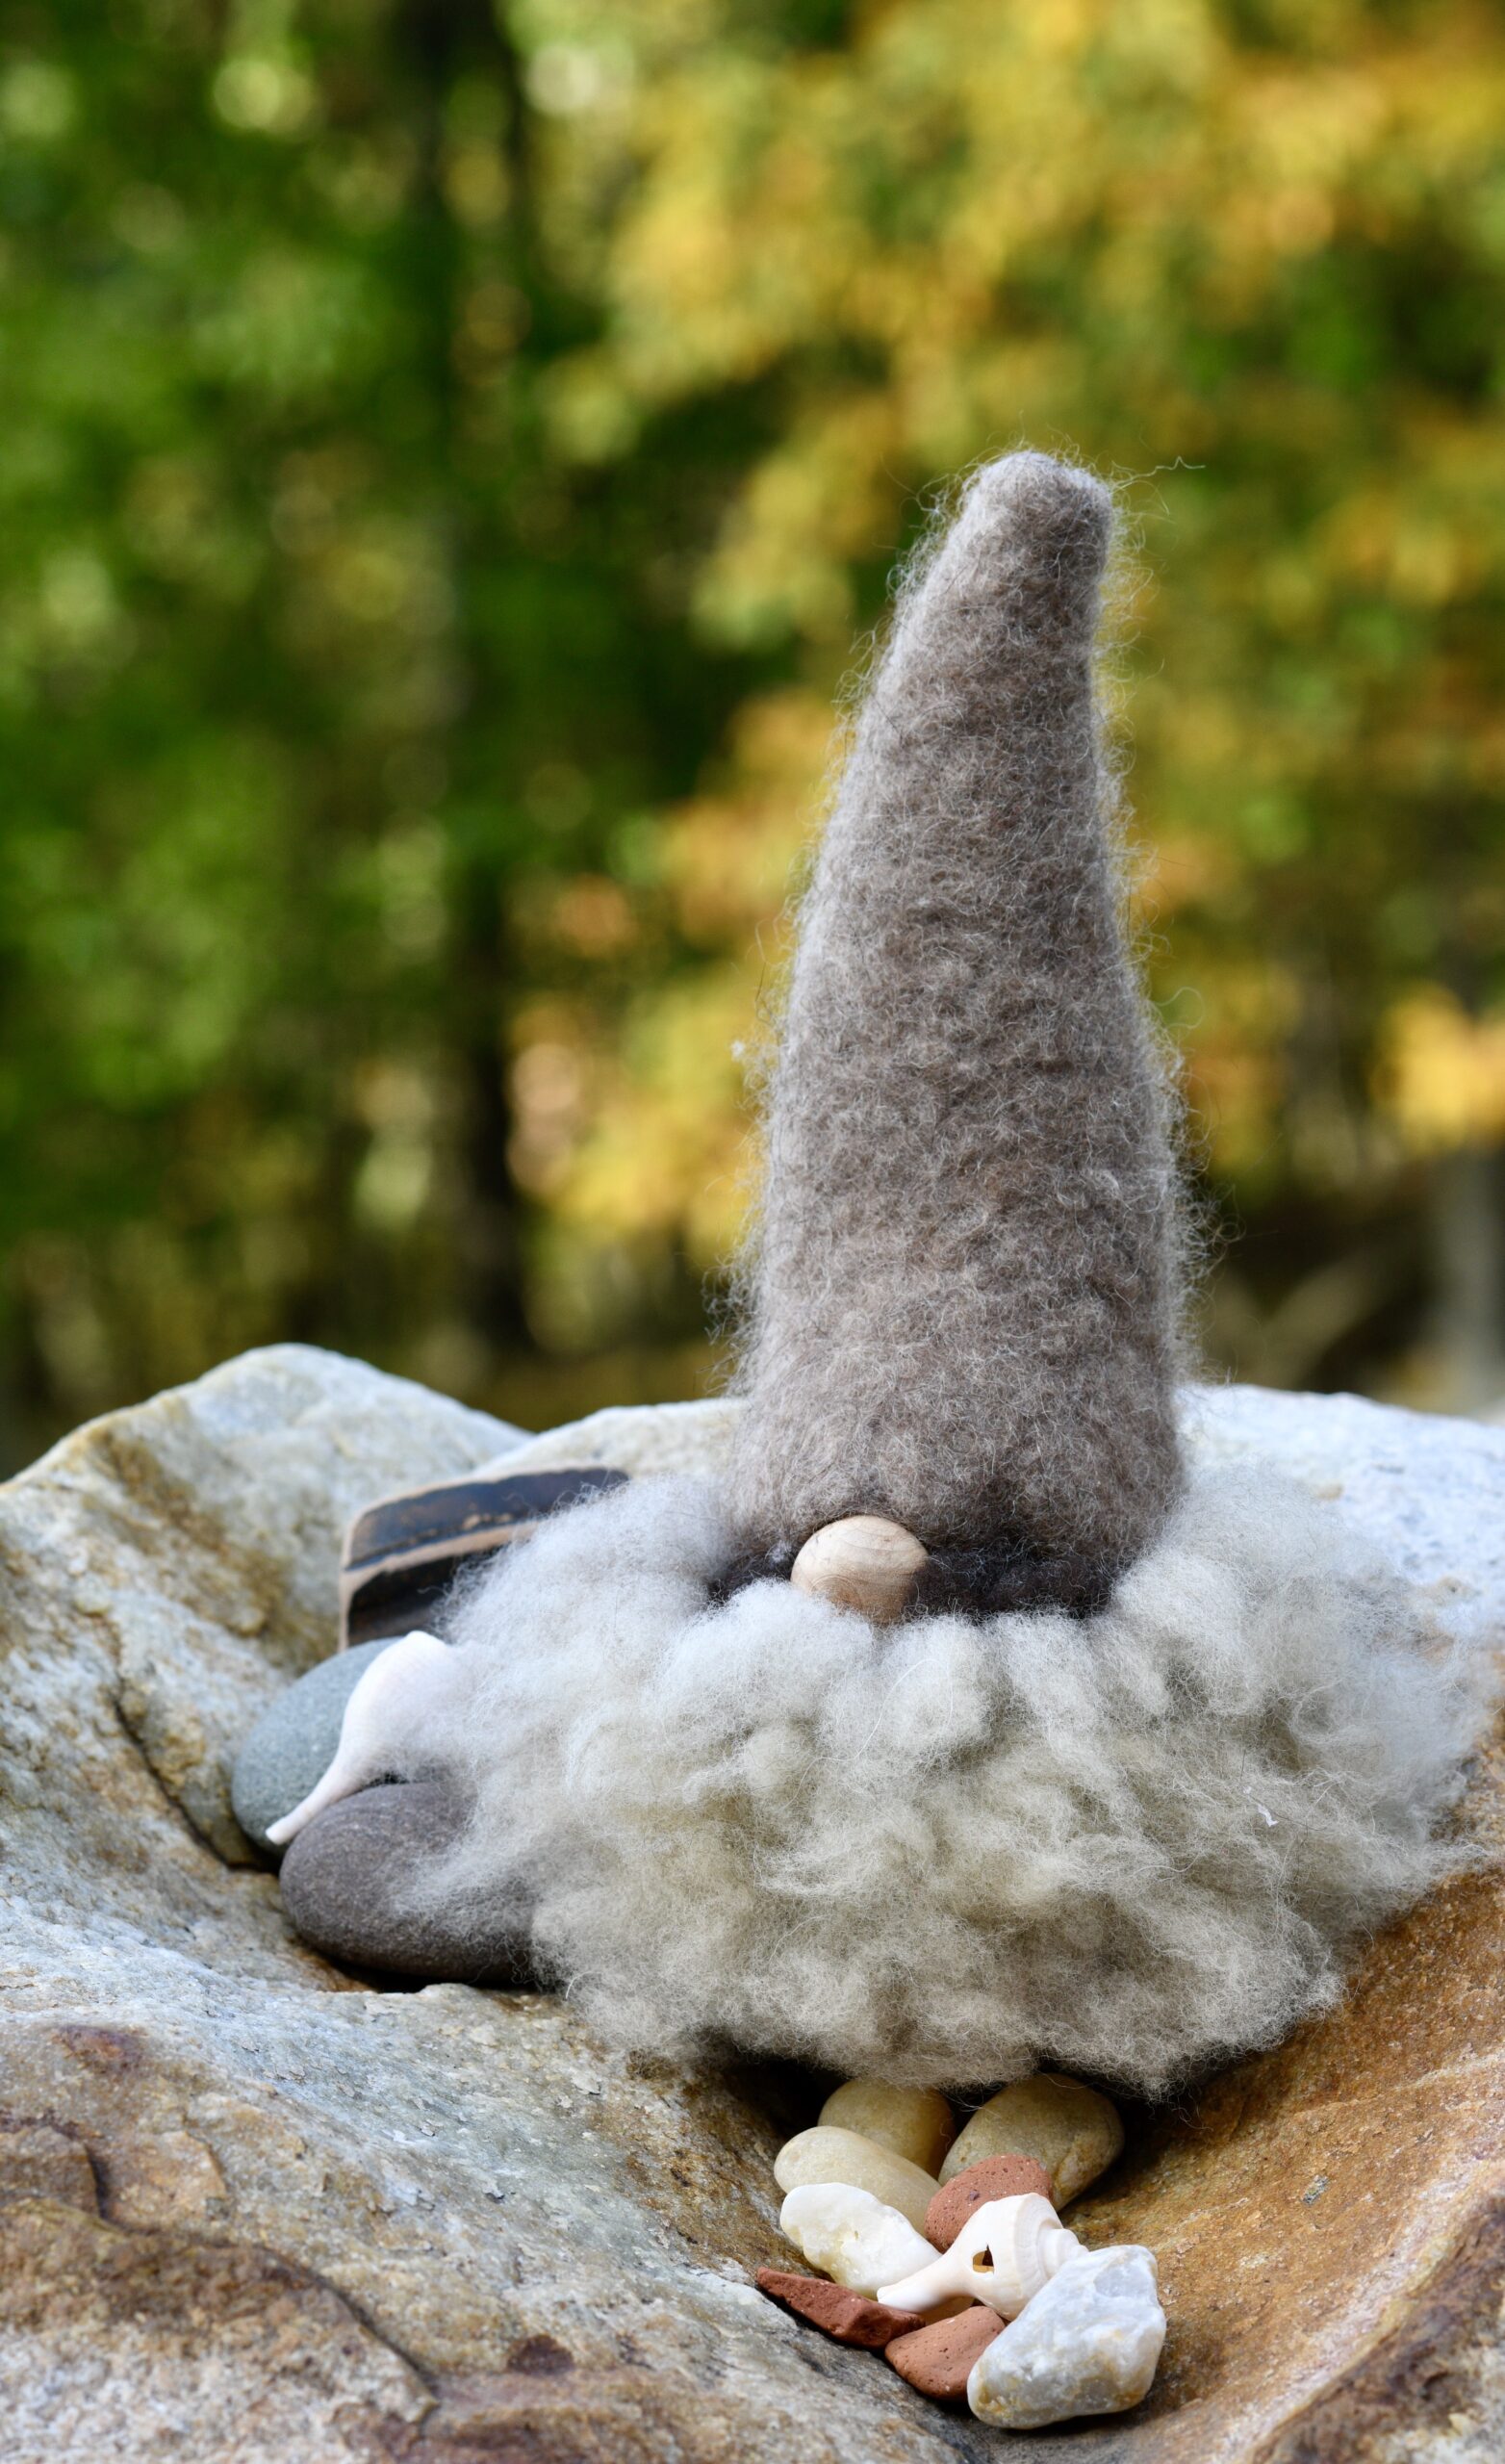 Additional Tomte Gnome